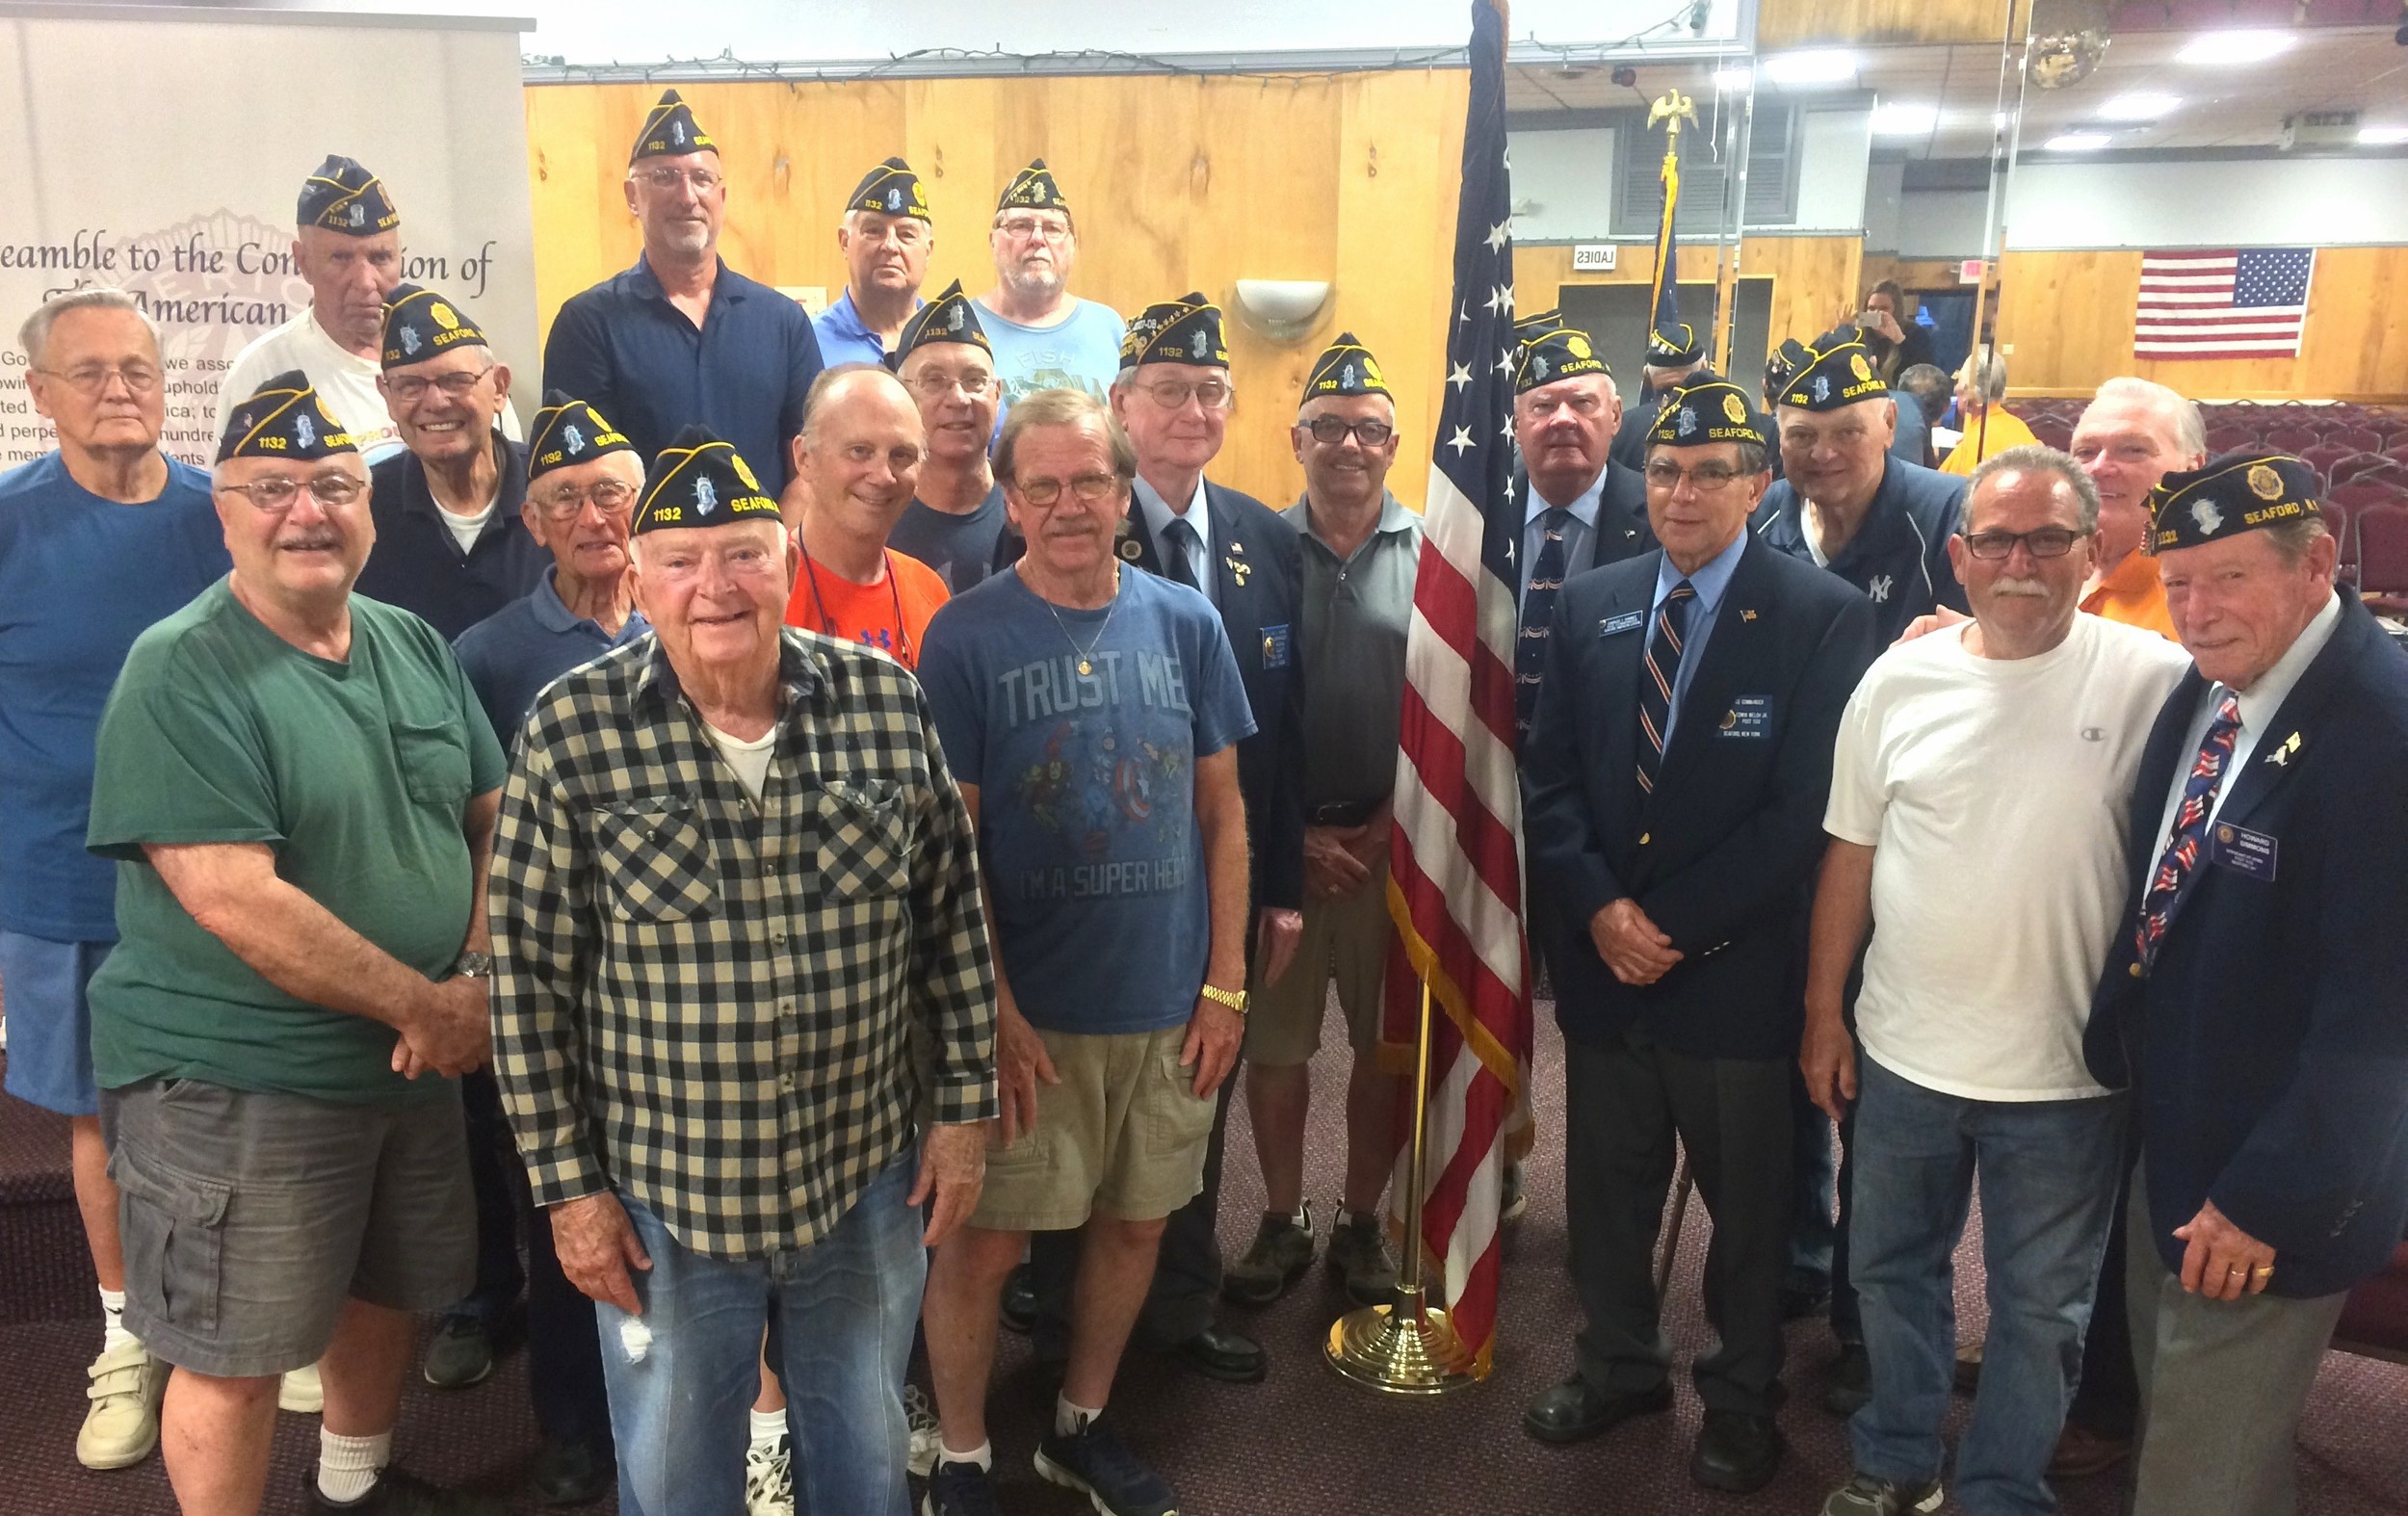 Members of Seaford American Legion Post 1132 shared what Flag Day means to them.